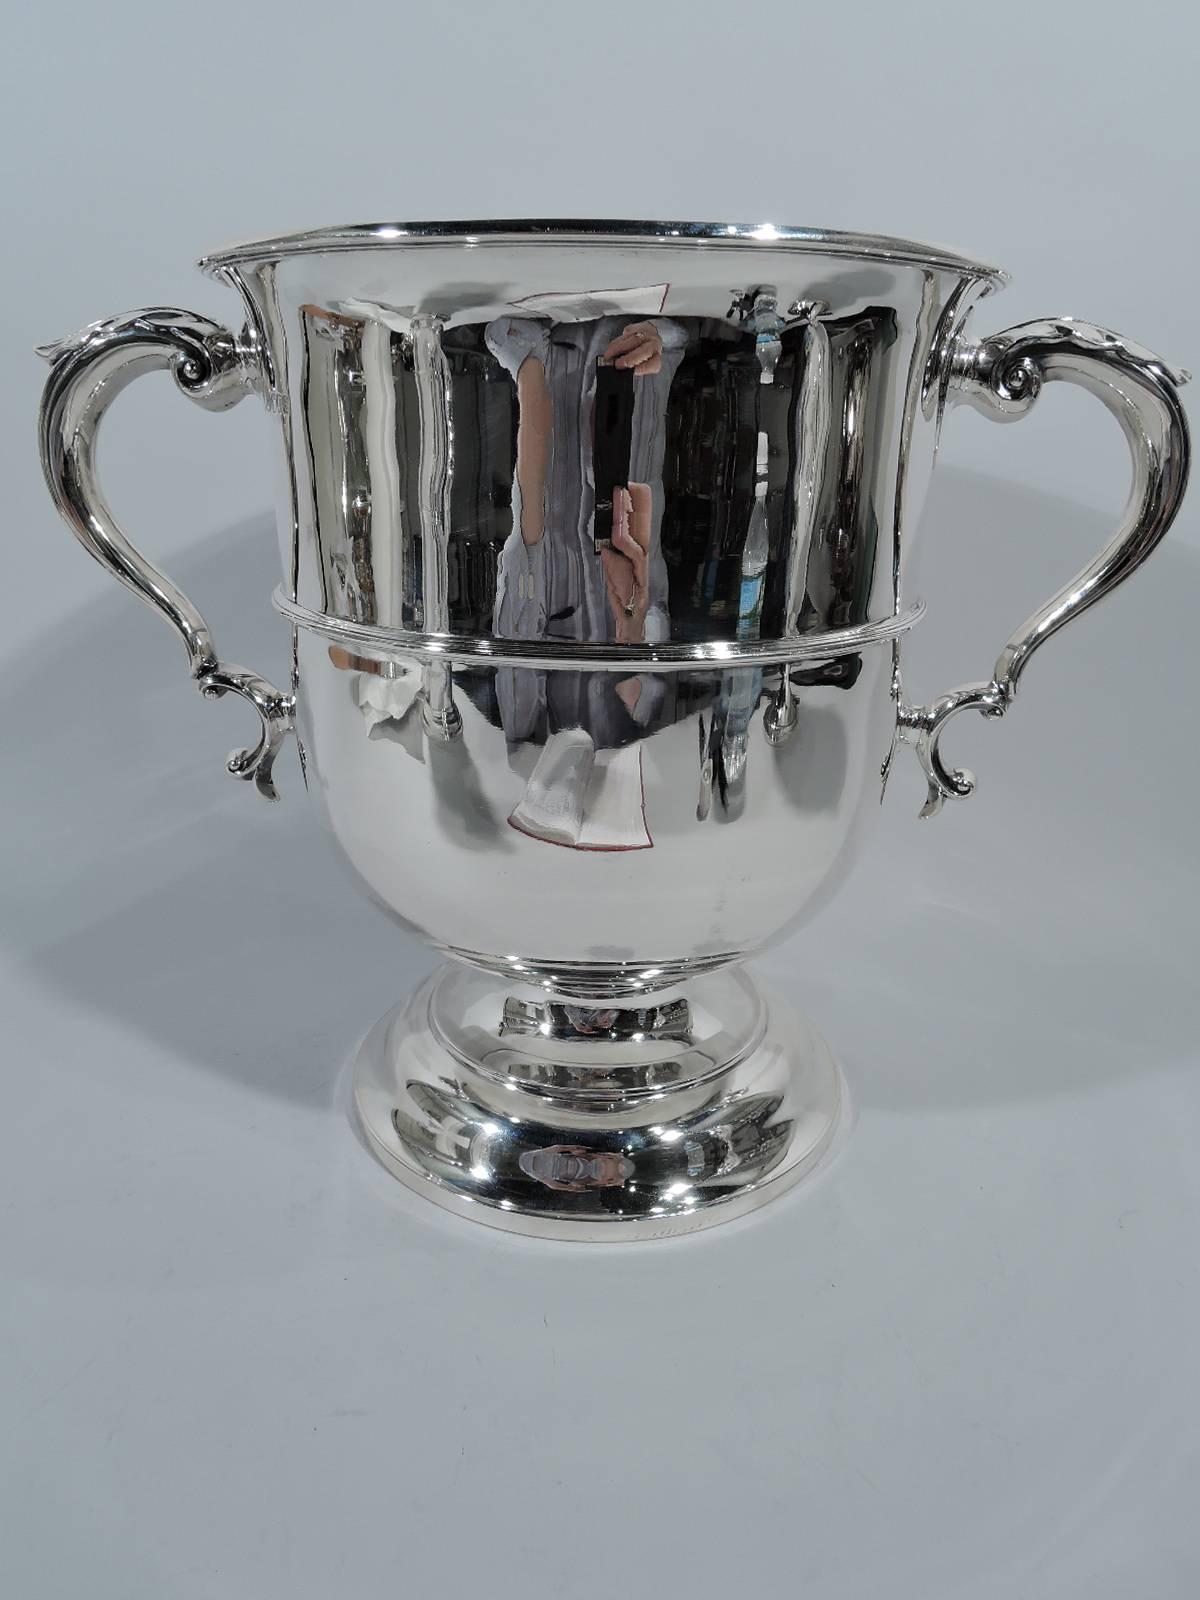 Edwardian sterling silver trophy cup. Made by Searle & Co. in London in 1904. Classic girdled urn with molded flared rim, stepped foot and leaf-capped double-scroll side handles. A beautiful first prize with lots of room for engraving. Hallmarked.